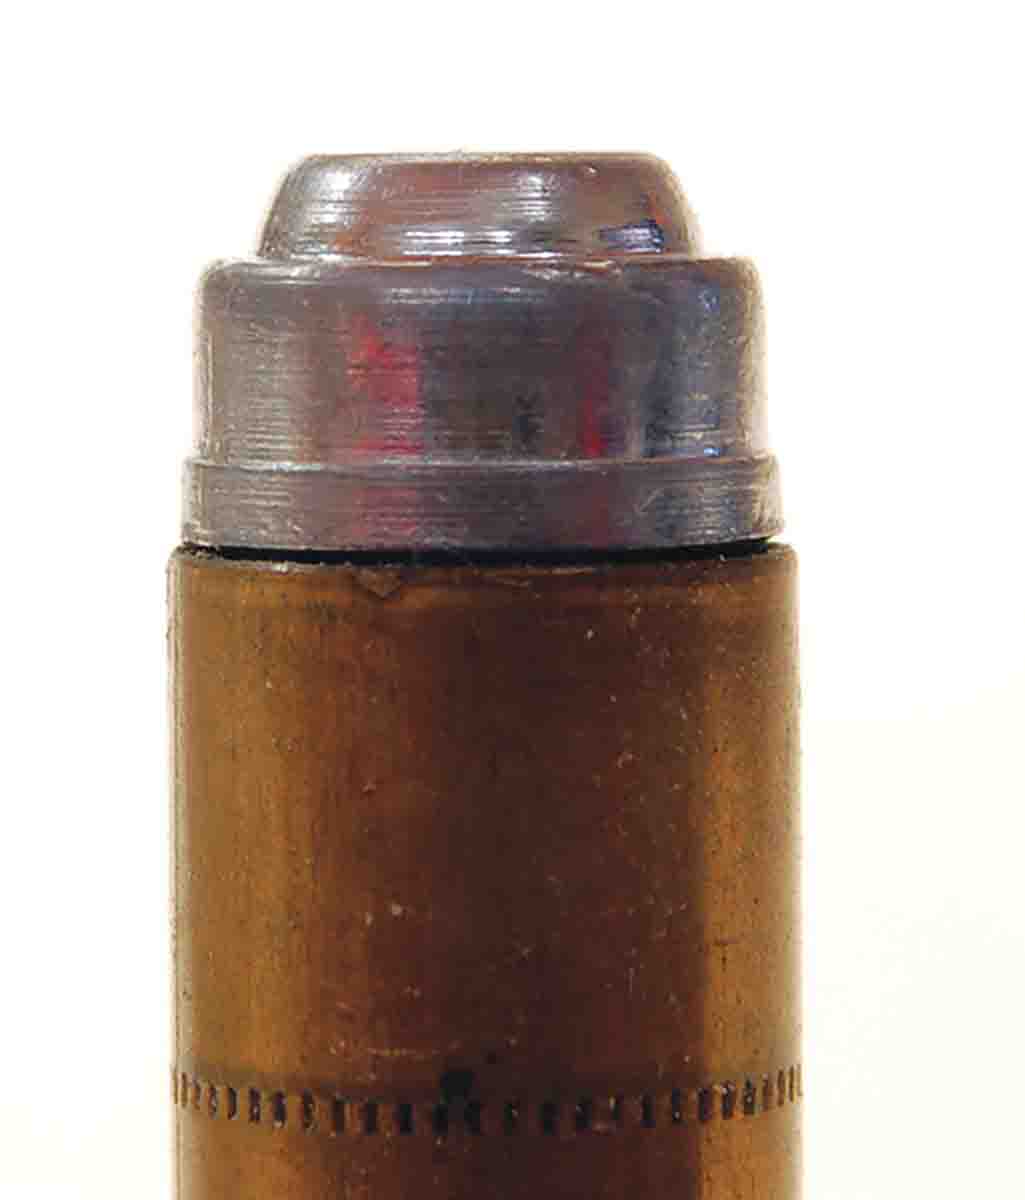 The groove diameter band just above the case mouth helps center the wadcutter bullet in a revolver’s chamber throat.